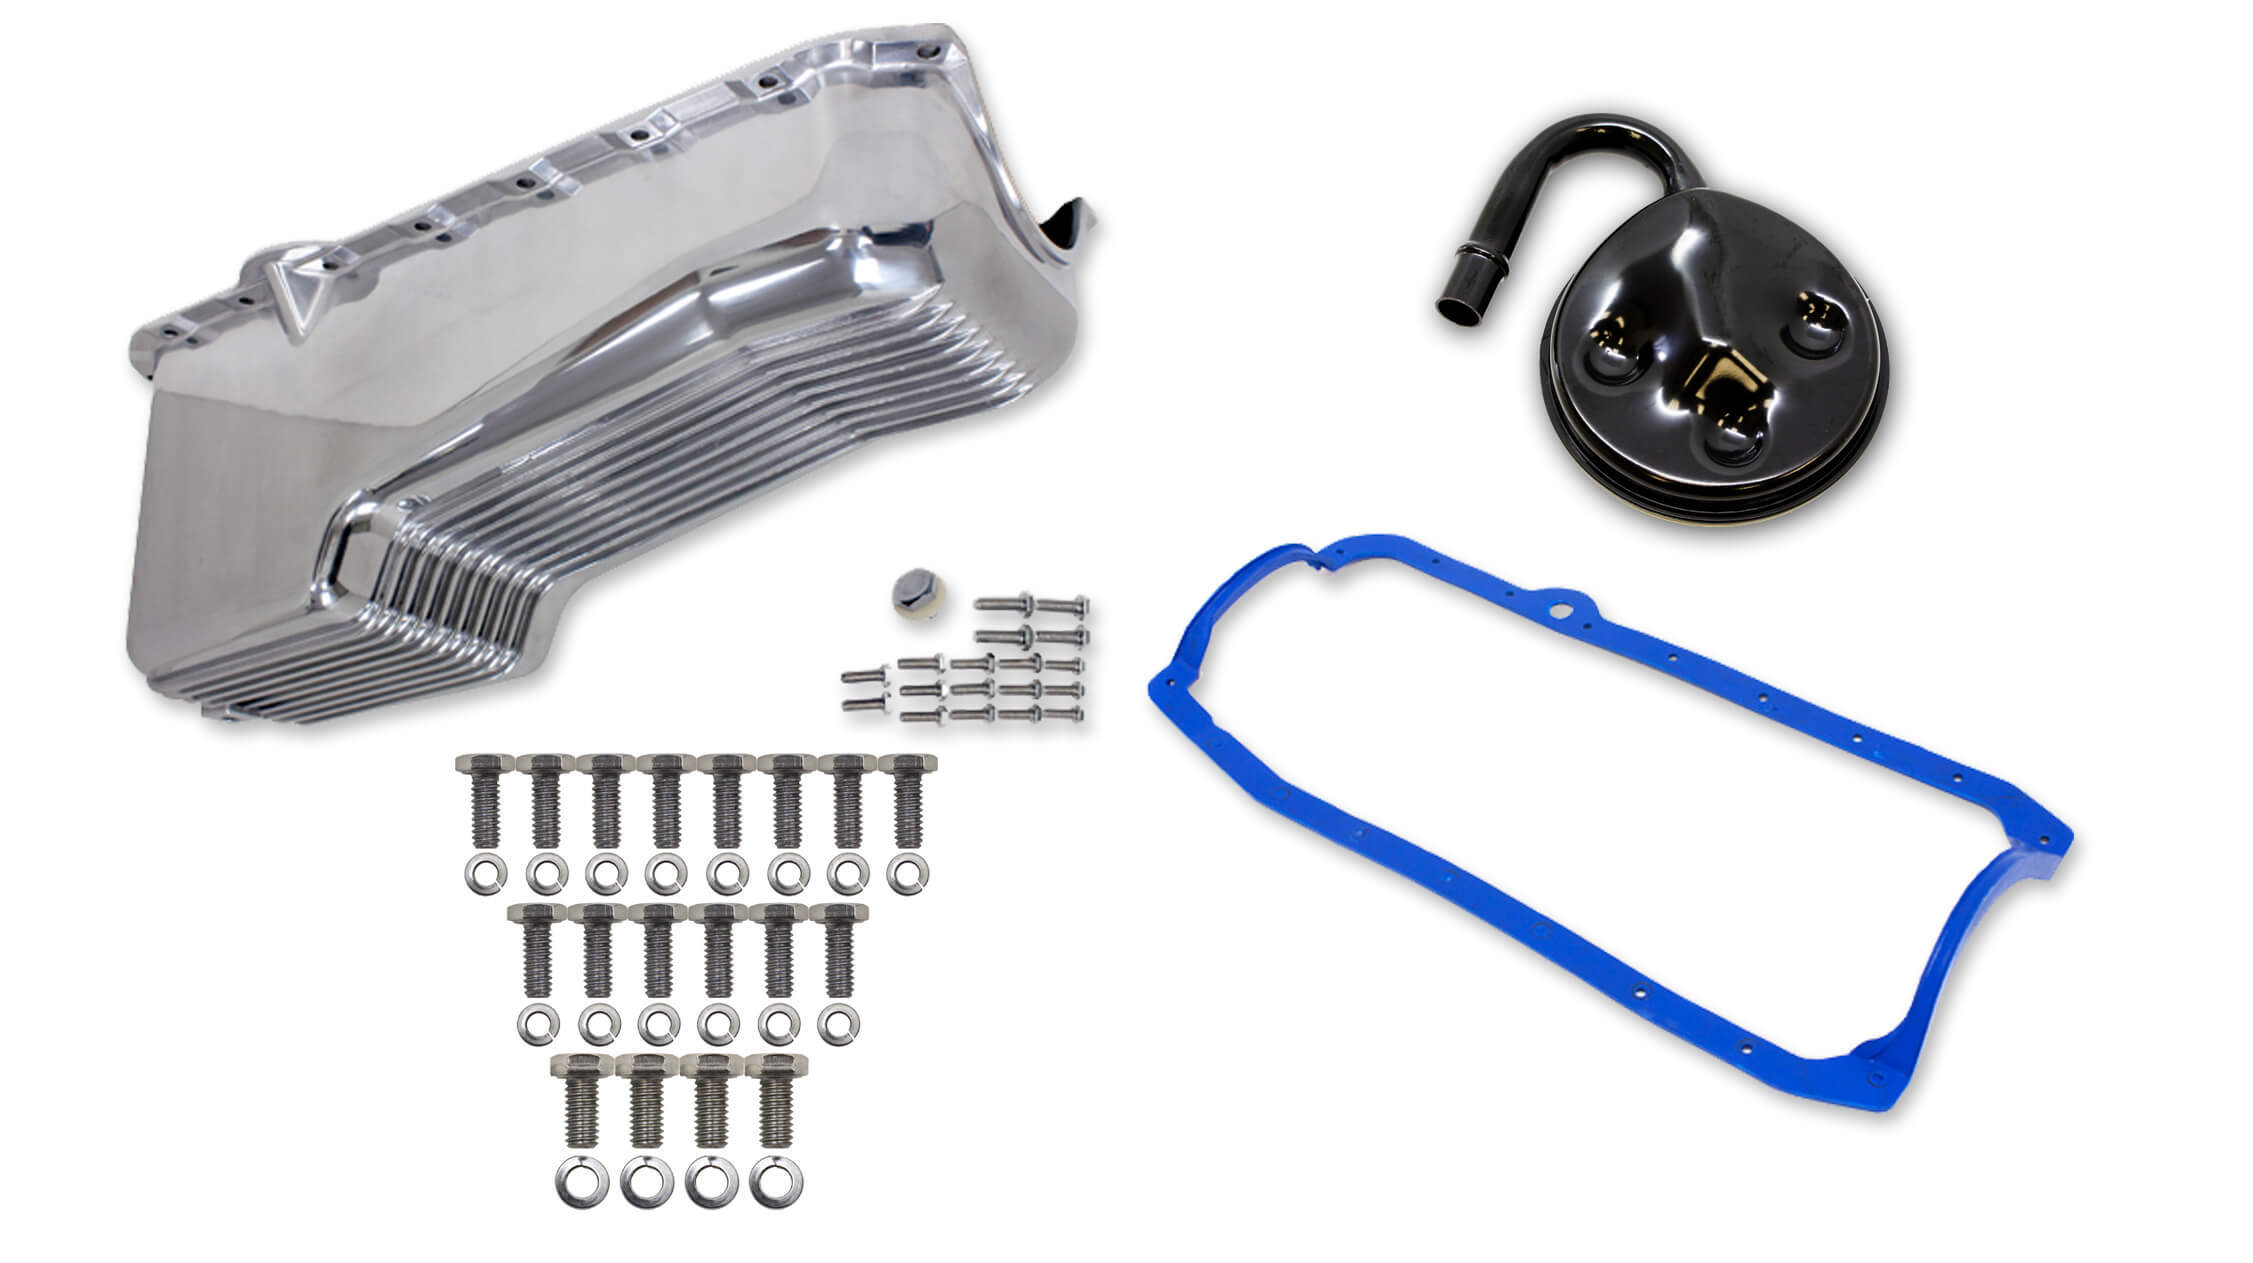 Weiand 6504FWND Engine Oil Pan Kit, Rear Sump, 4 qt, 7-5/16 in Deep, Hardware / Gasket / Pickup, Aluminum, Polished, Small Block Chevy, Kit